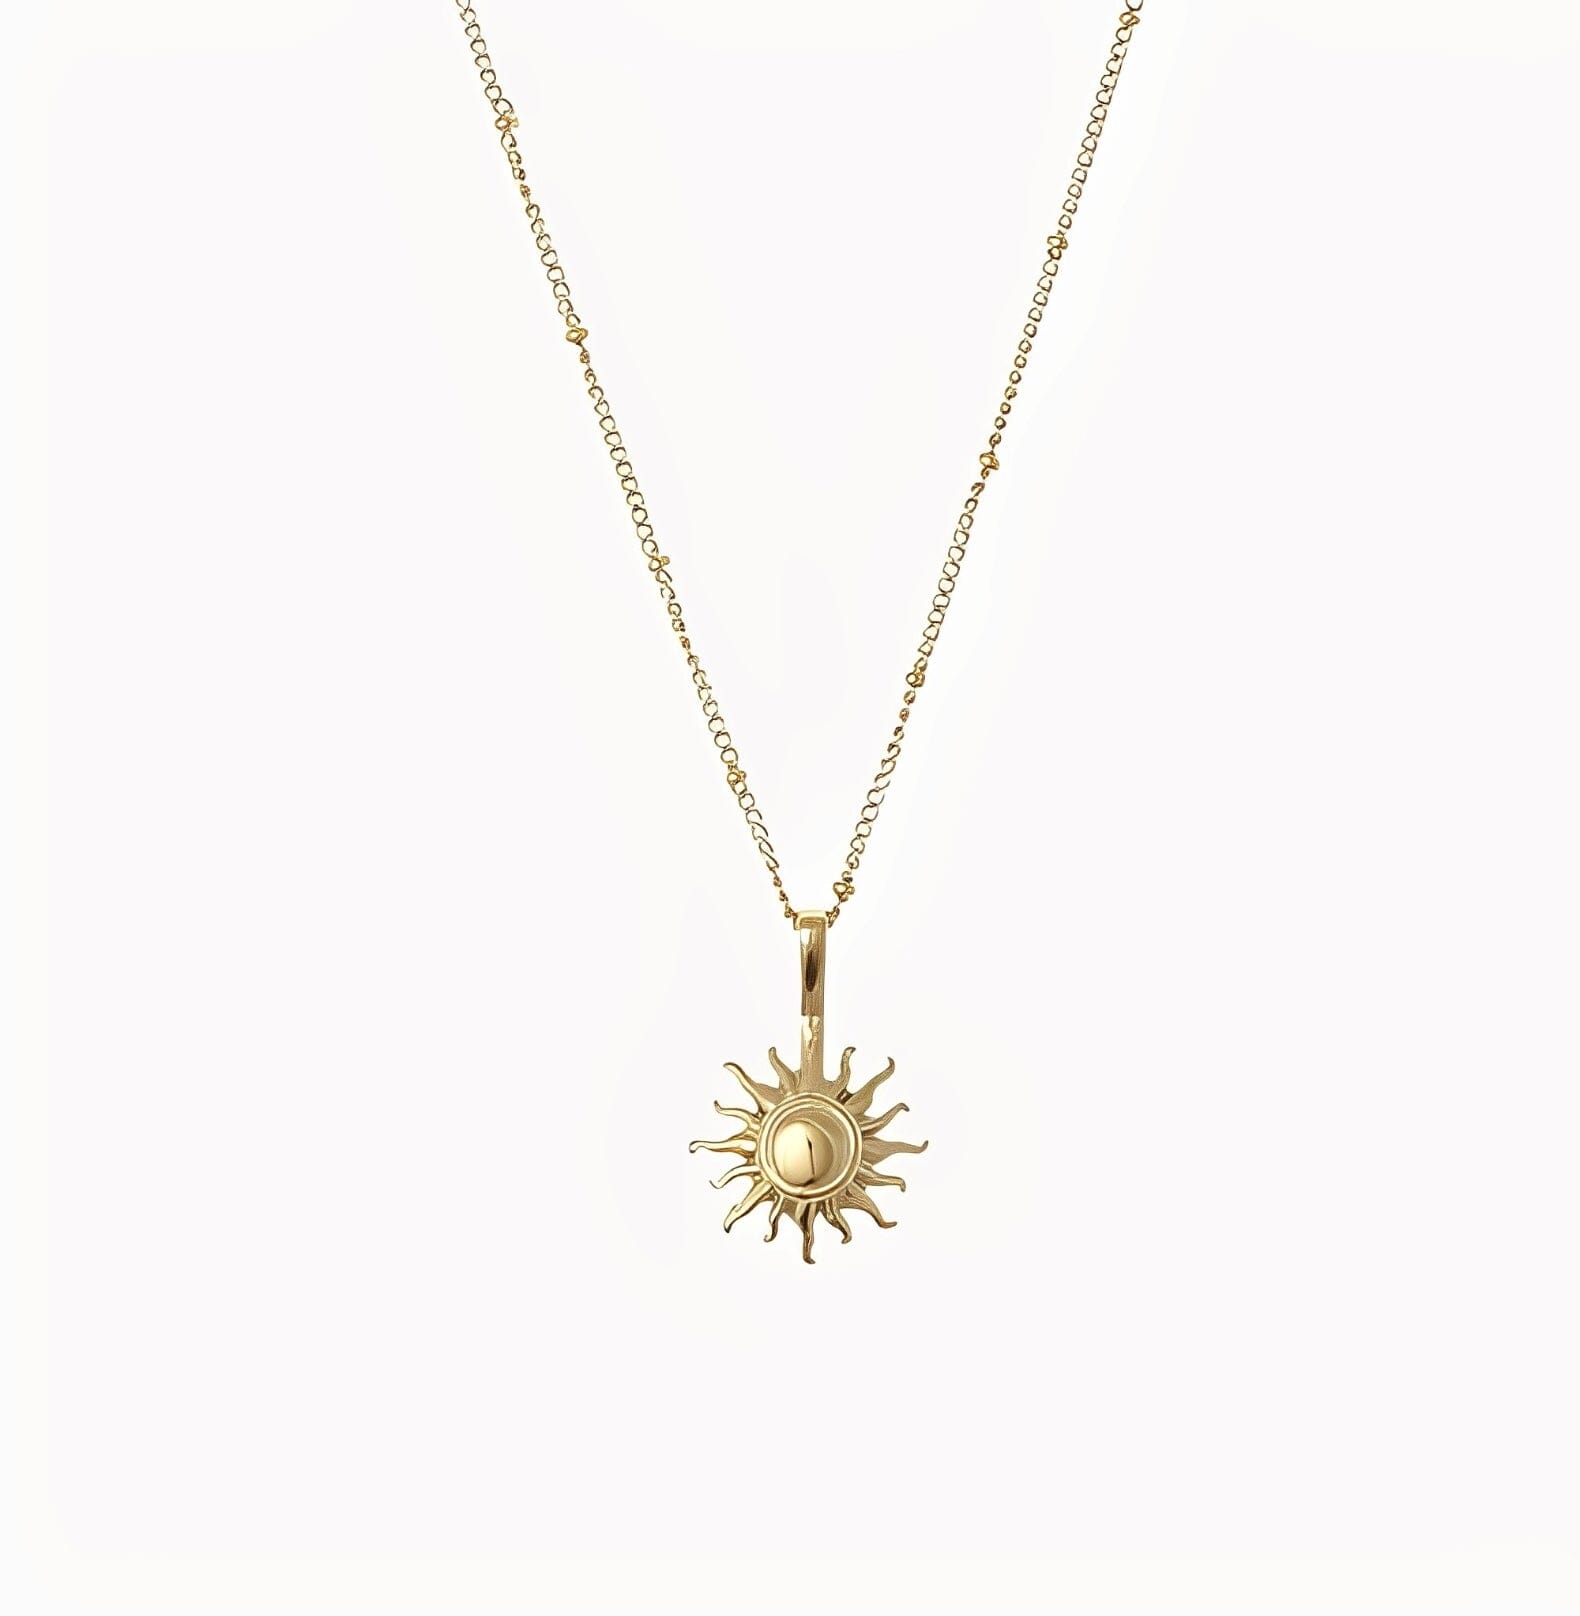 SUN PENDANT NECKLACE neck Yubama Jewelry Online Store - The Elegant Designs of Gold and Silver ! 